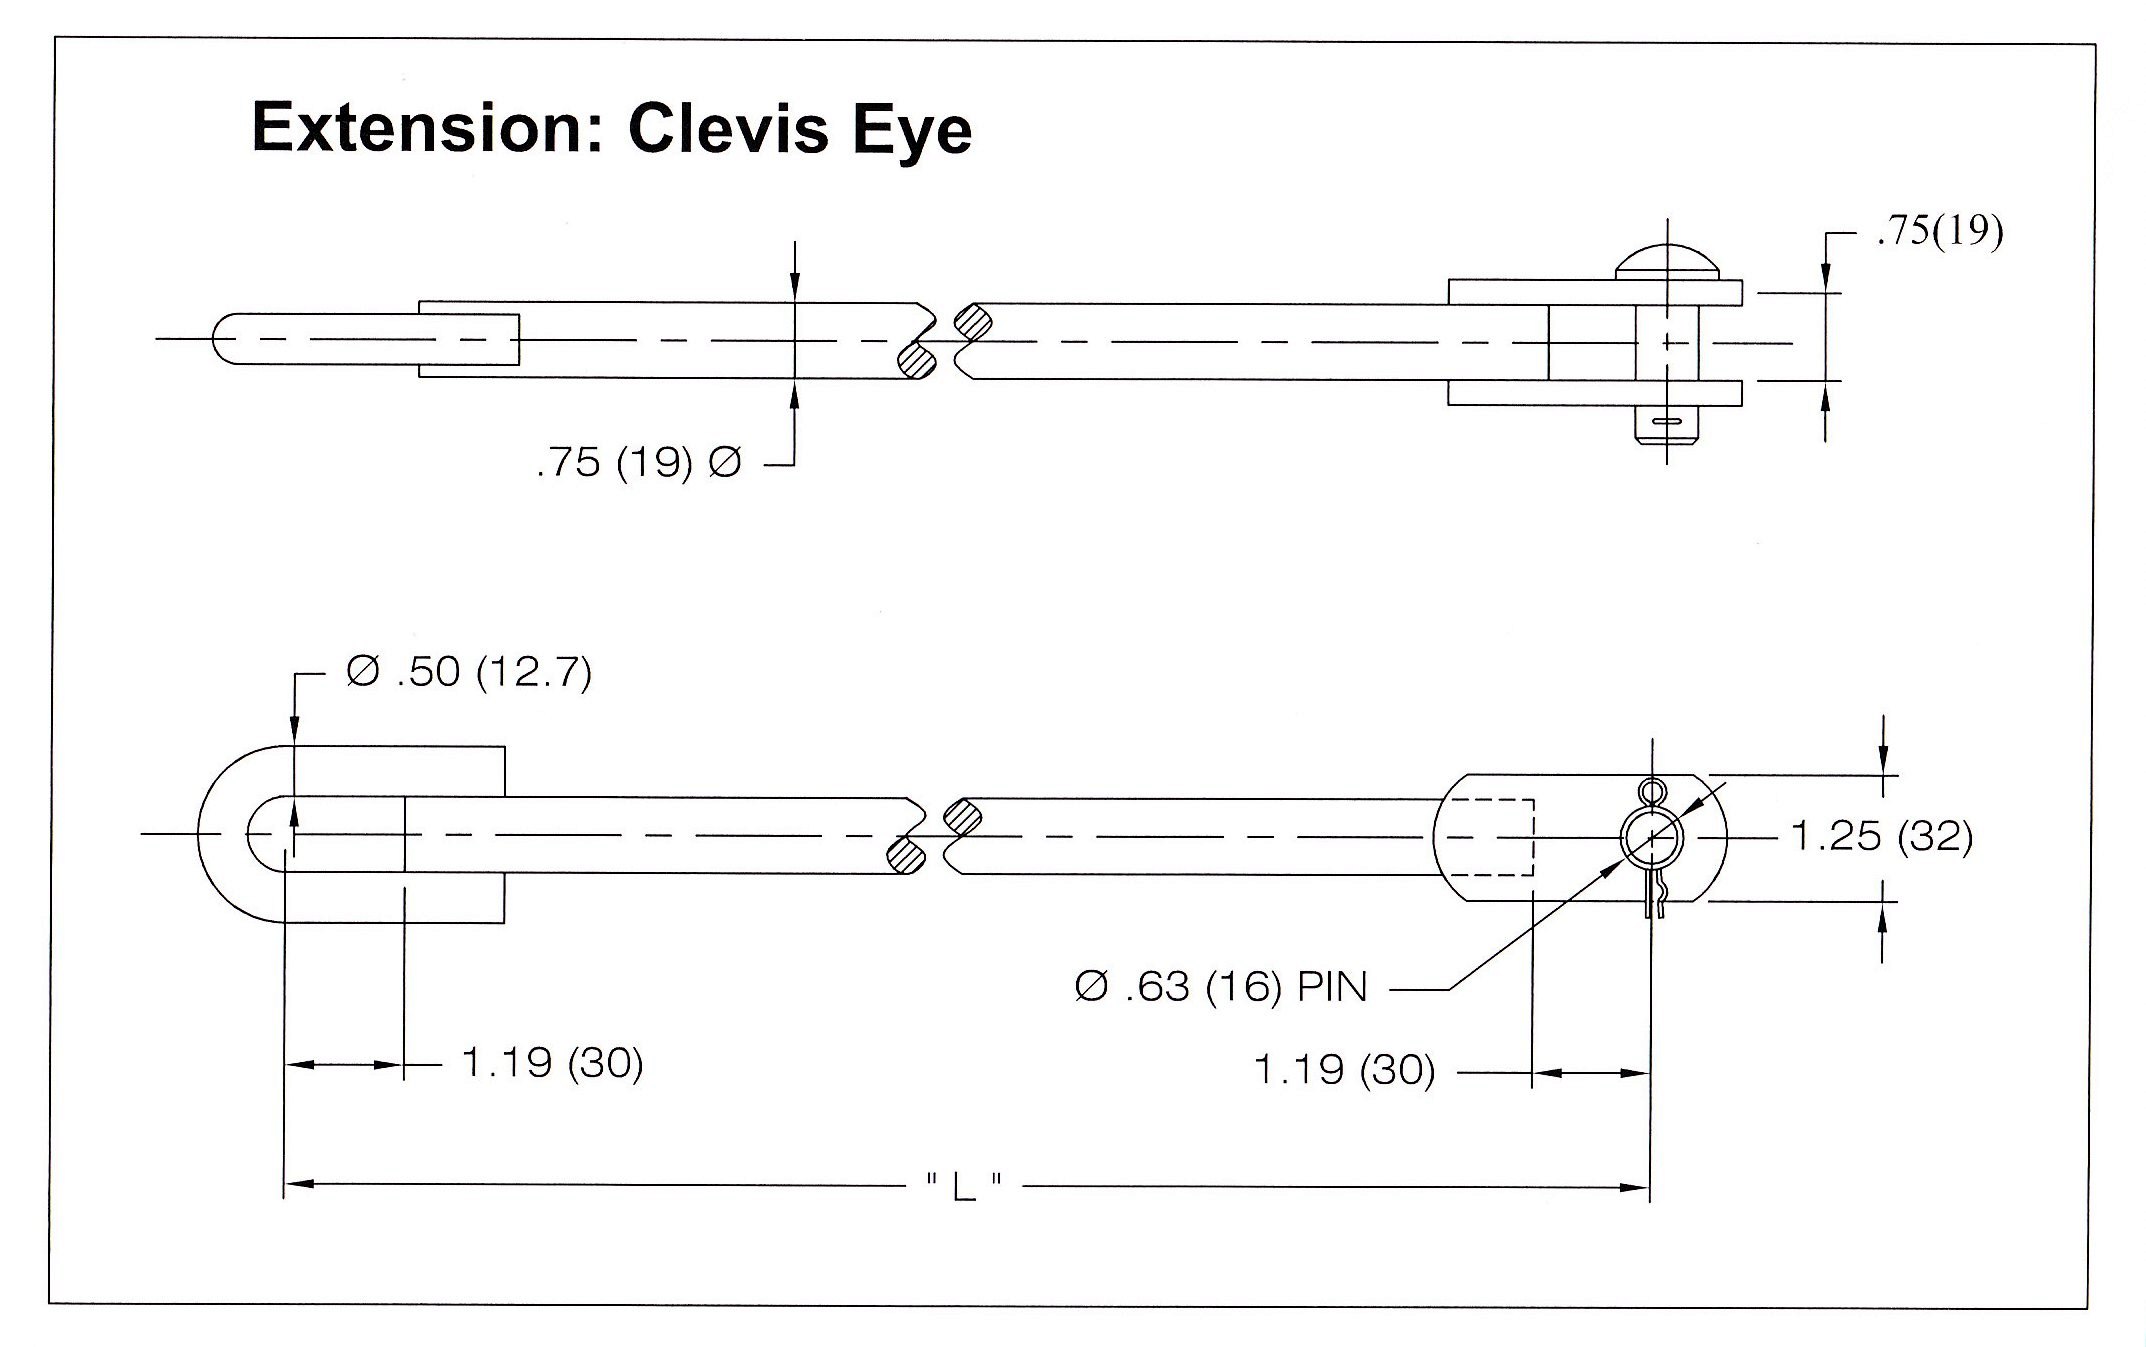 PAGE 1 Extinsion Clevis Eye.jpg